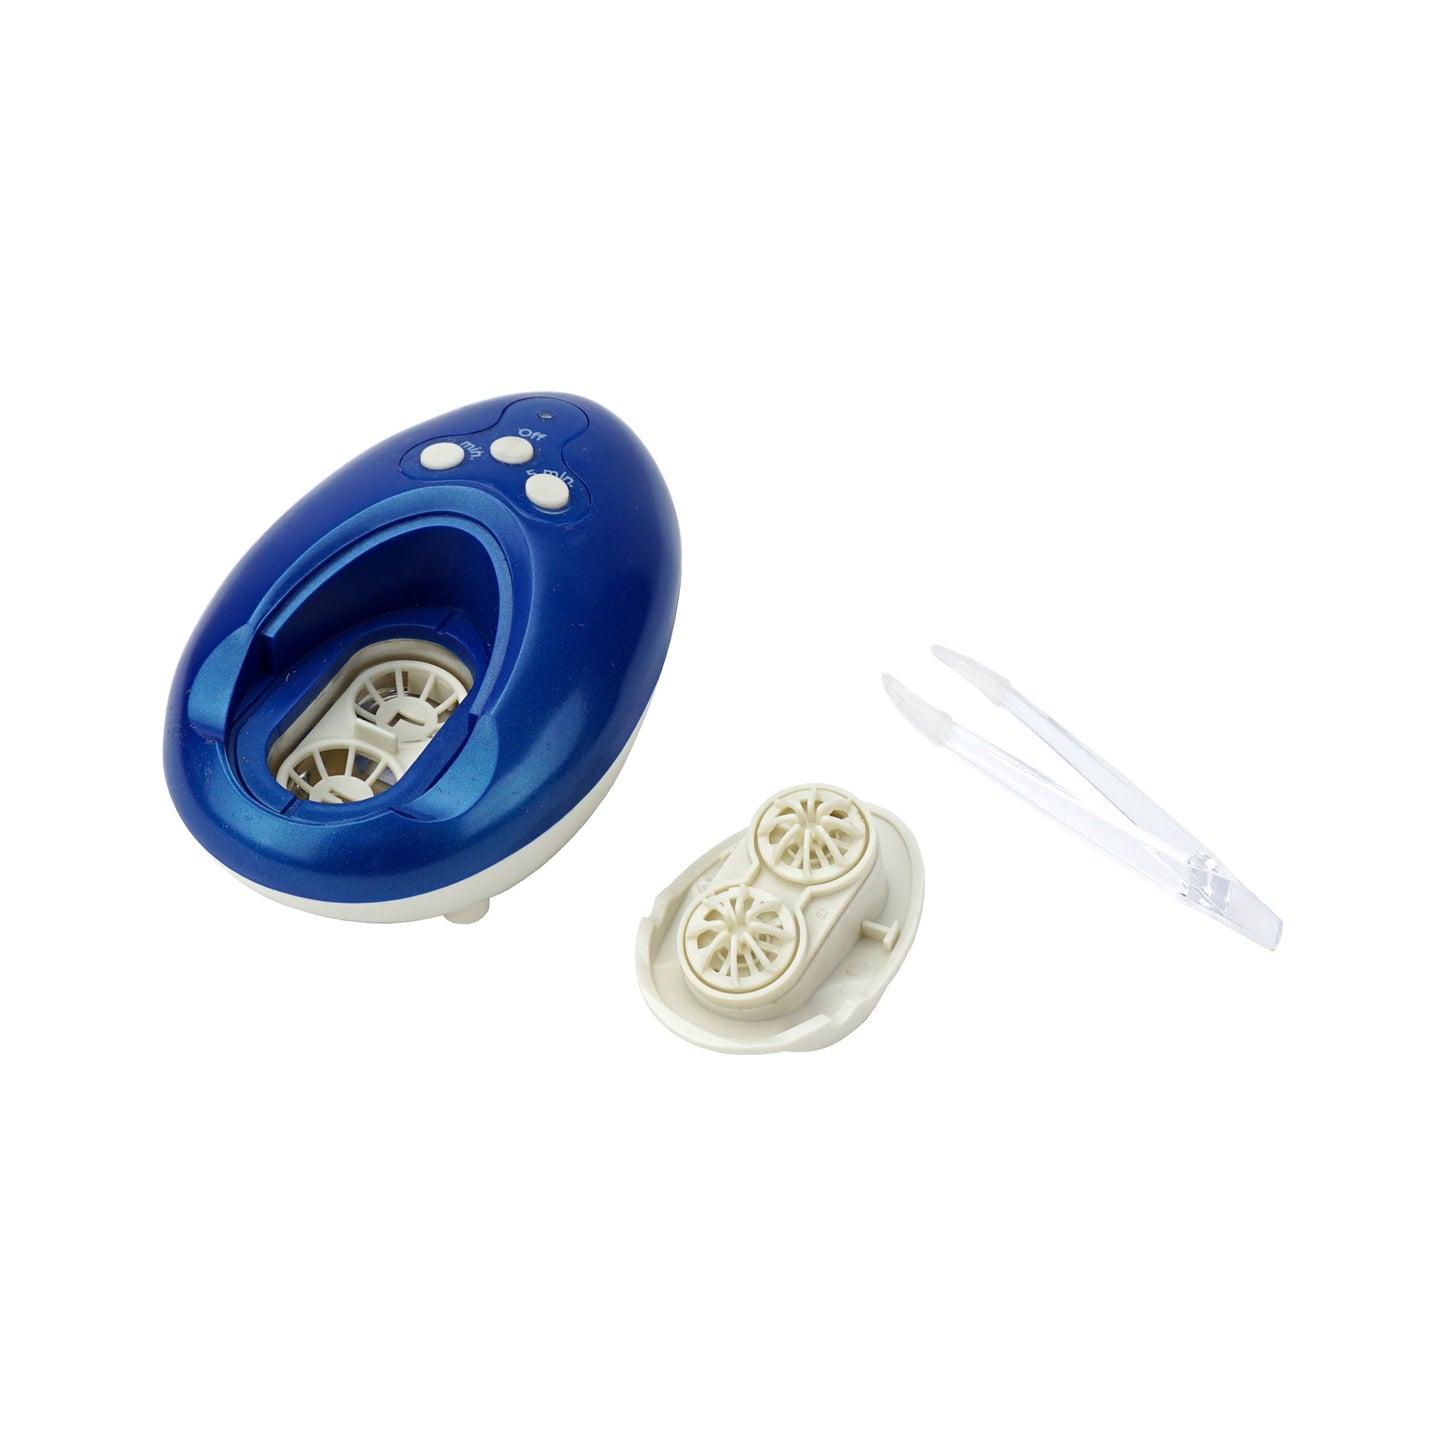 F2900 | iSonic® Ultrasonic Ortho-K and Hard Contact Lens Cleaner, global voltages